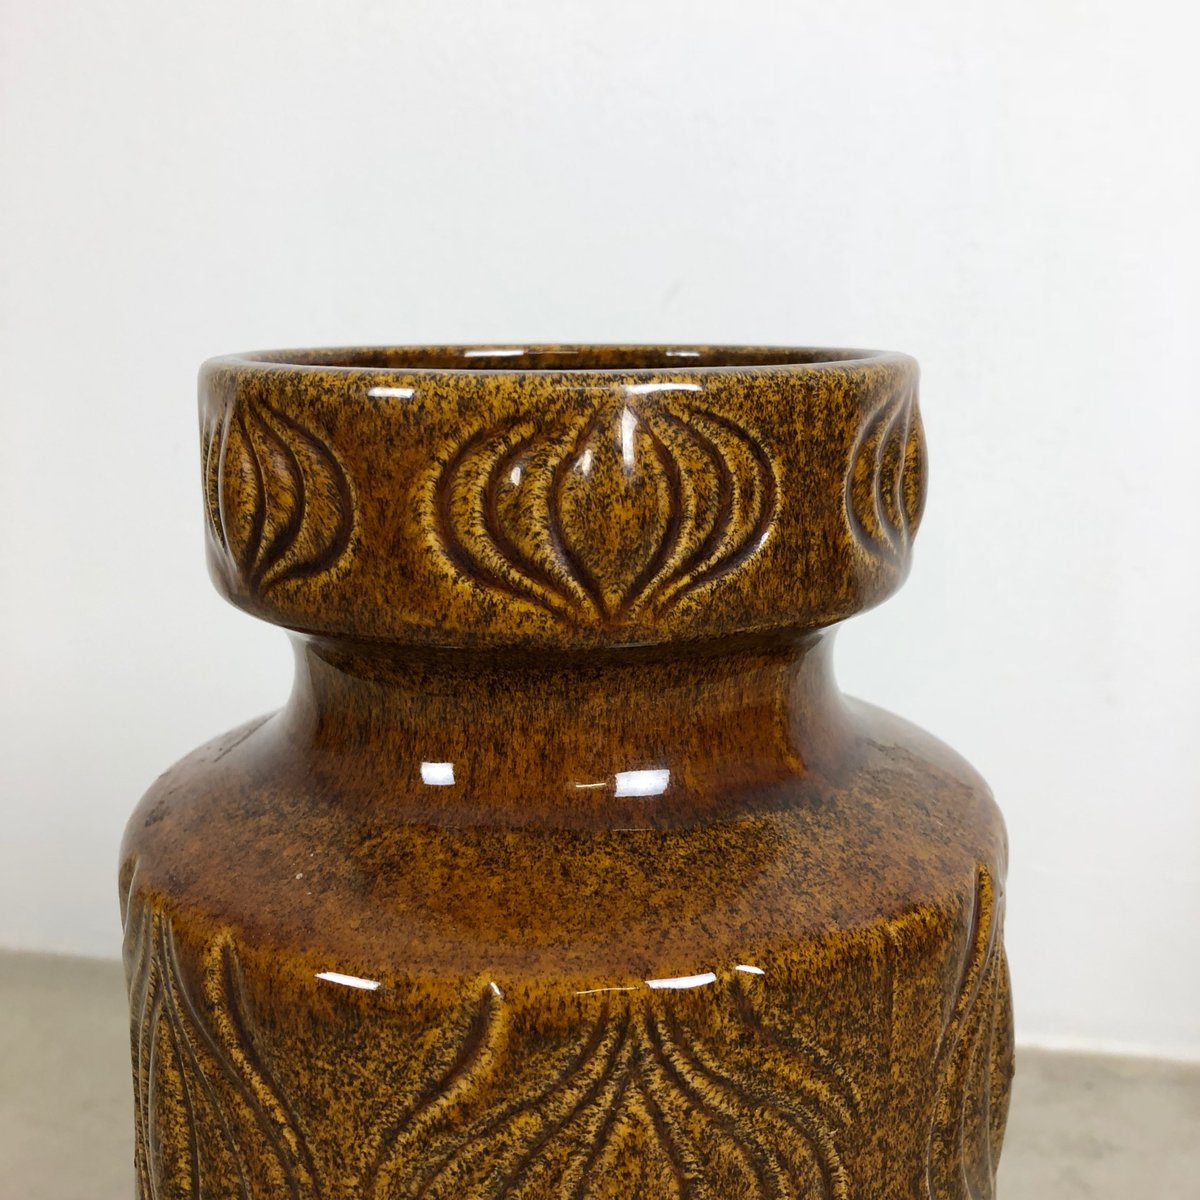 Floor Vase from Scheurich, 1970s for sale at Pamono